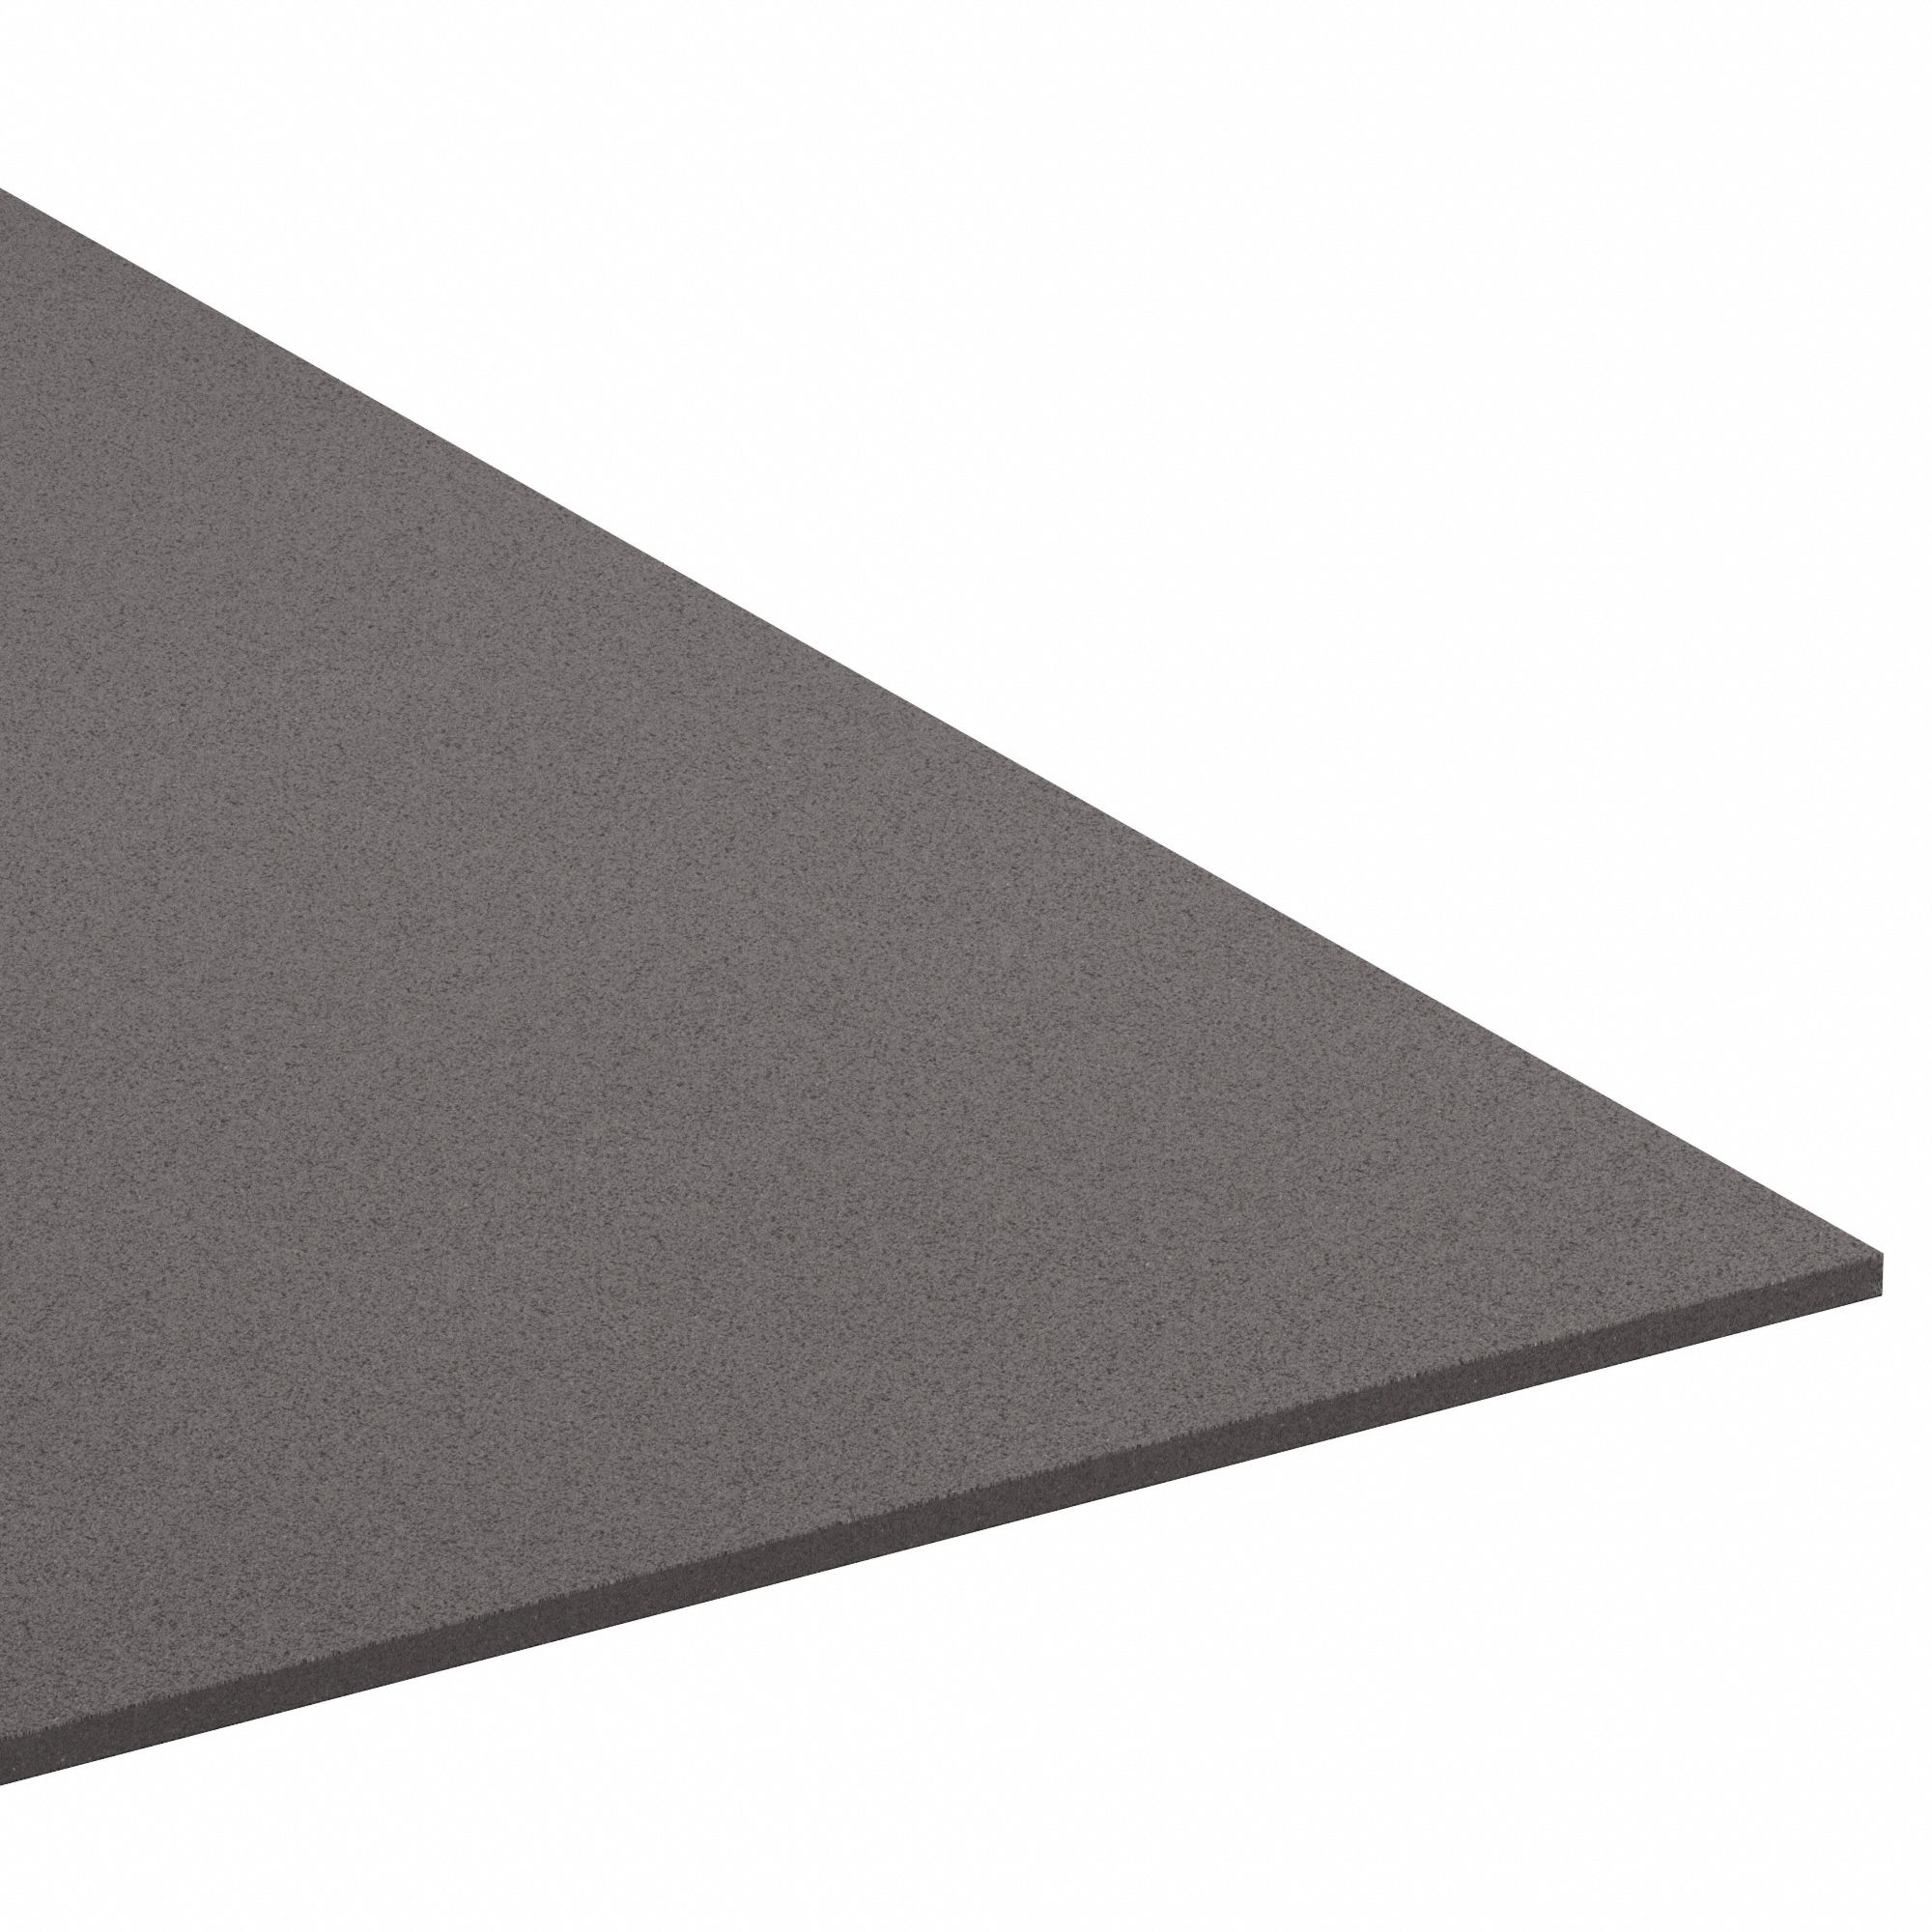 Polyethylene Sheet: Military Specification, 24 in x 4 1/2 ft, 1/2 in Thick,  Gray, Closed Cell, Plain